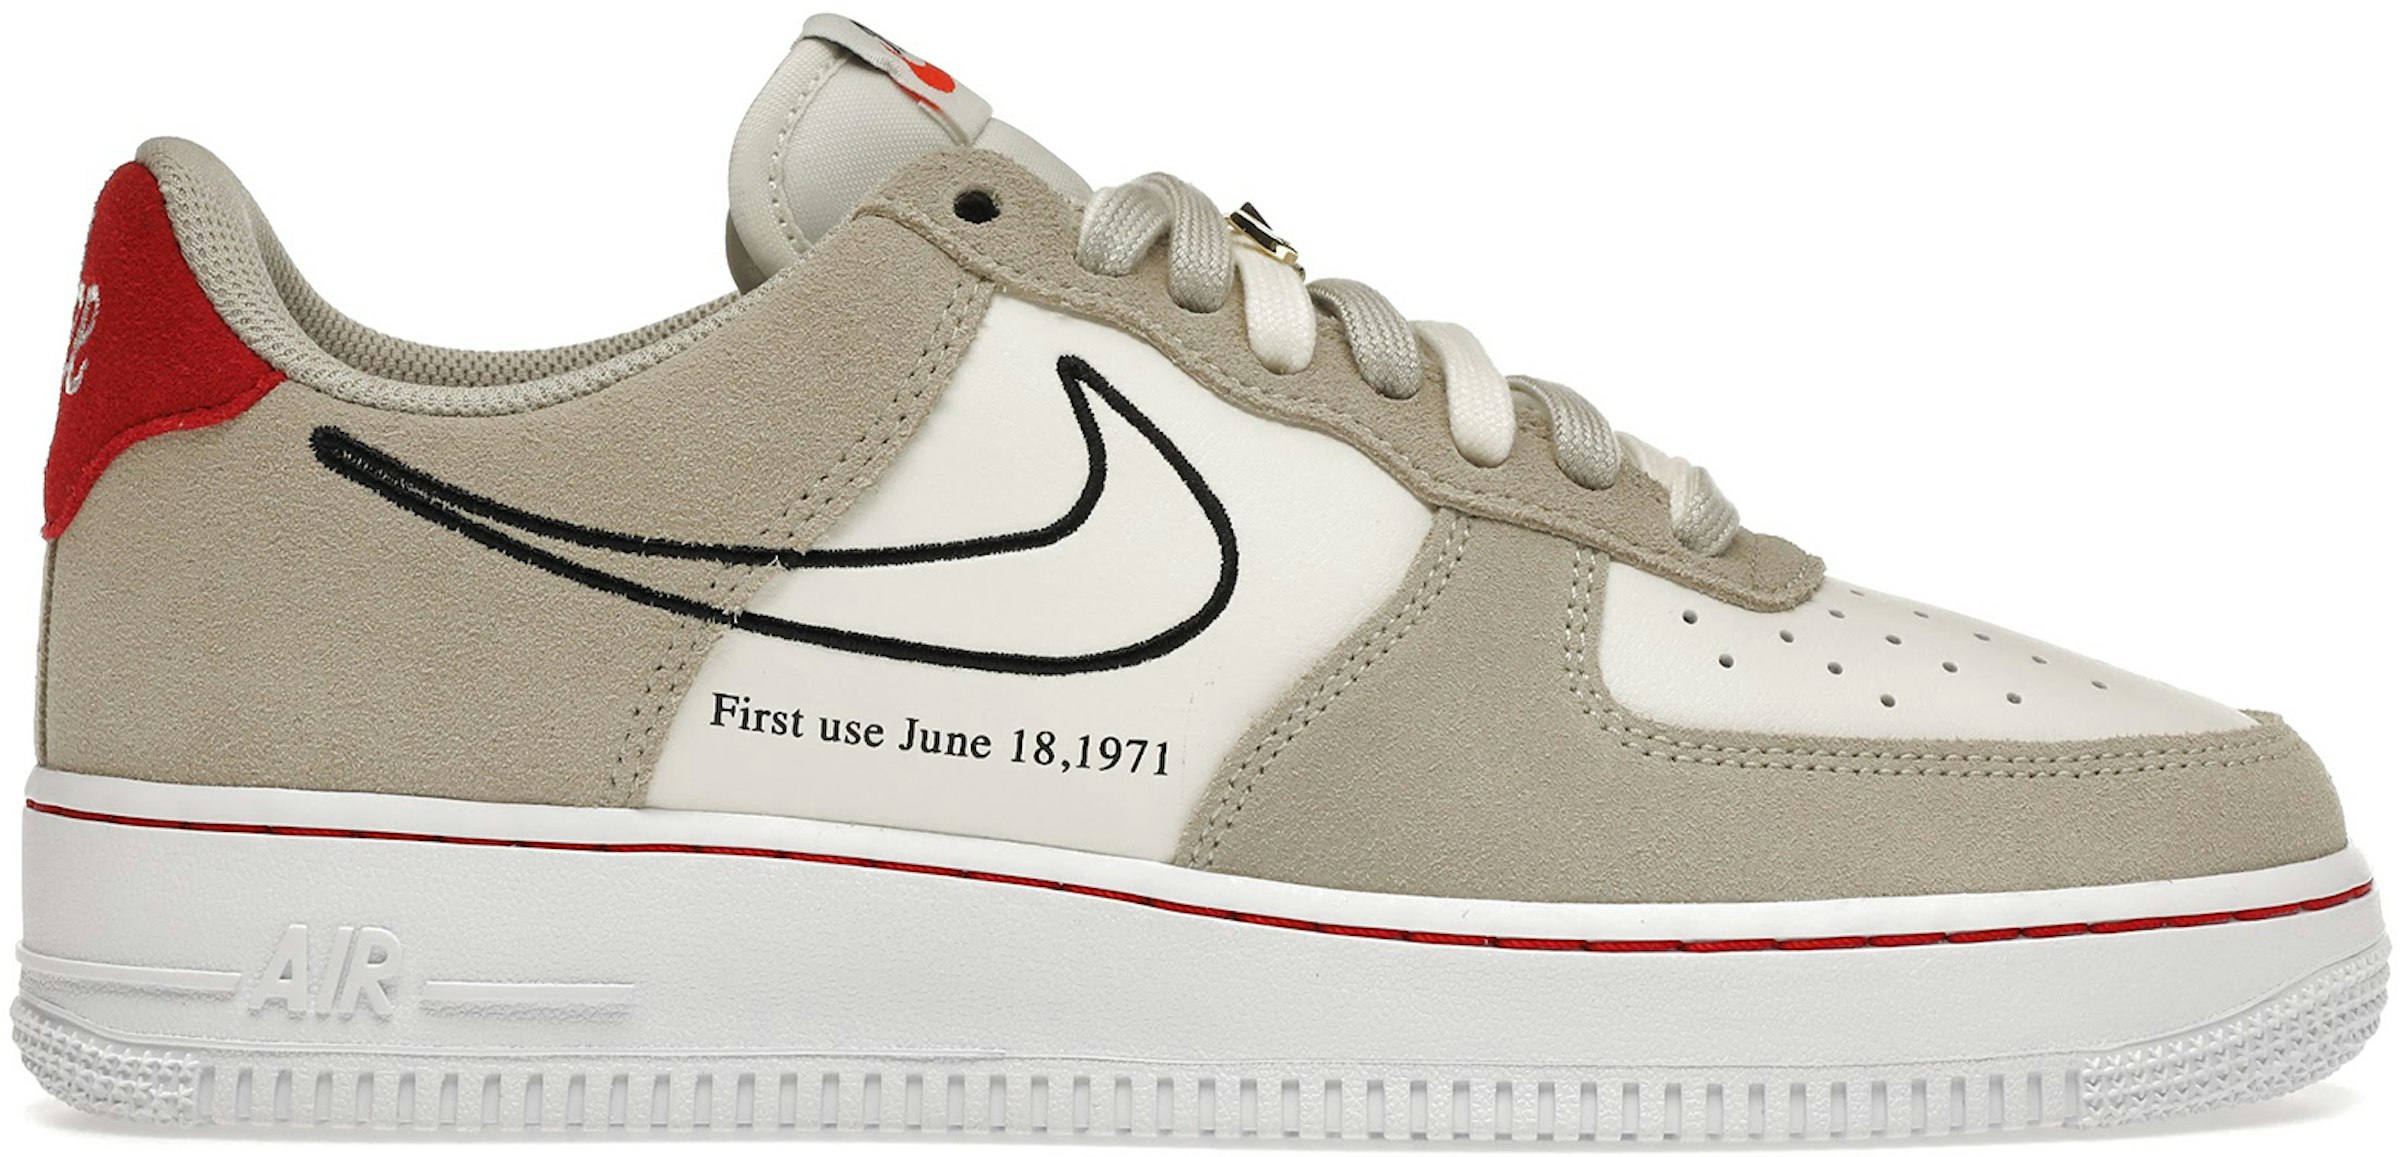 Simposio celebracion insuficiente Nike Air Force 1 Low First Use Light Sail Red Men's - DB3597-100 - US